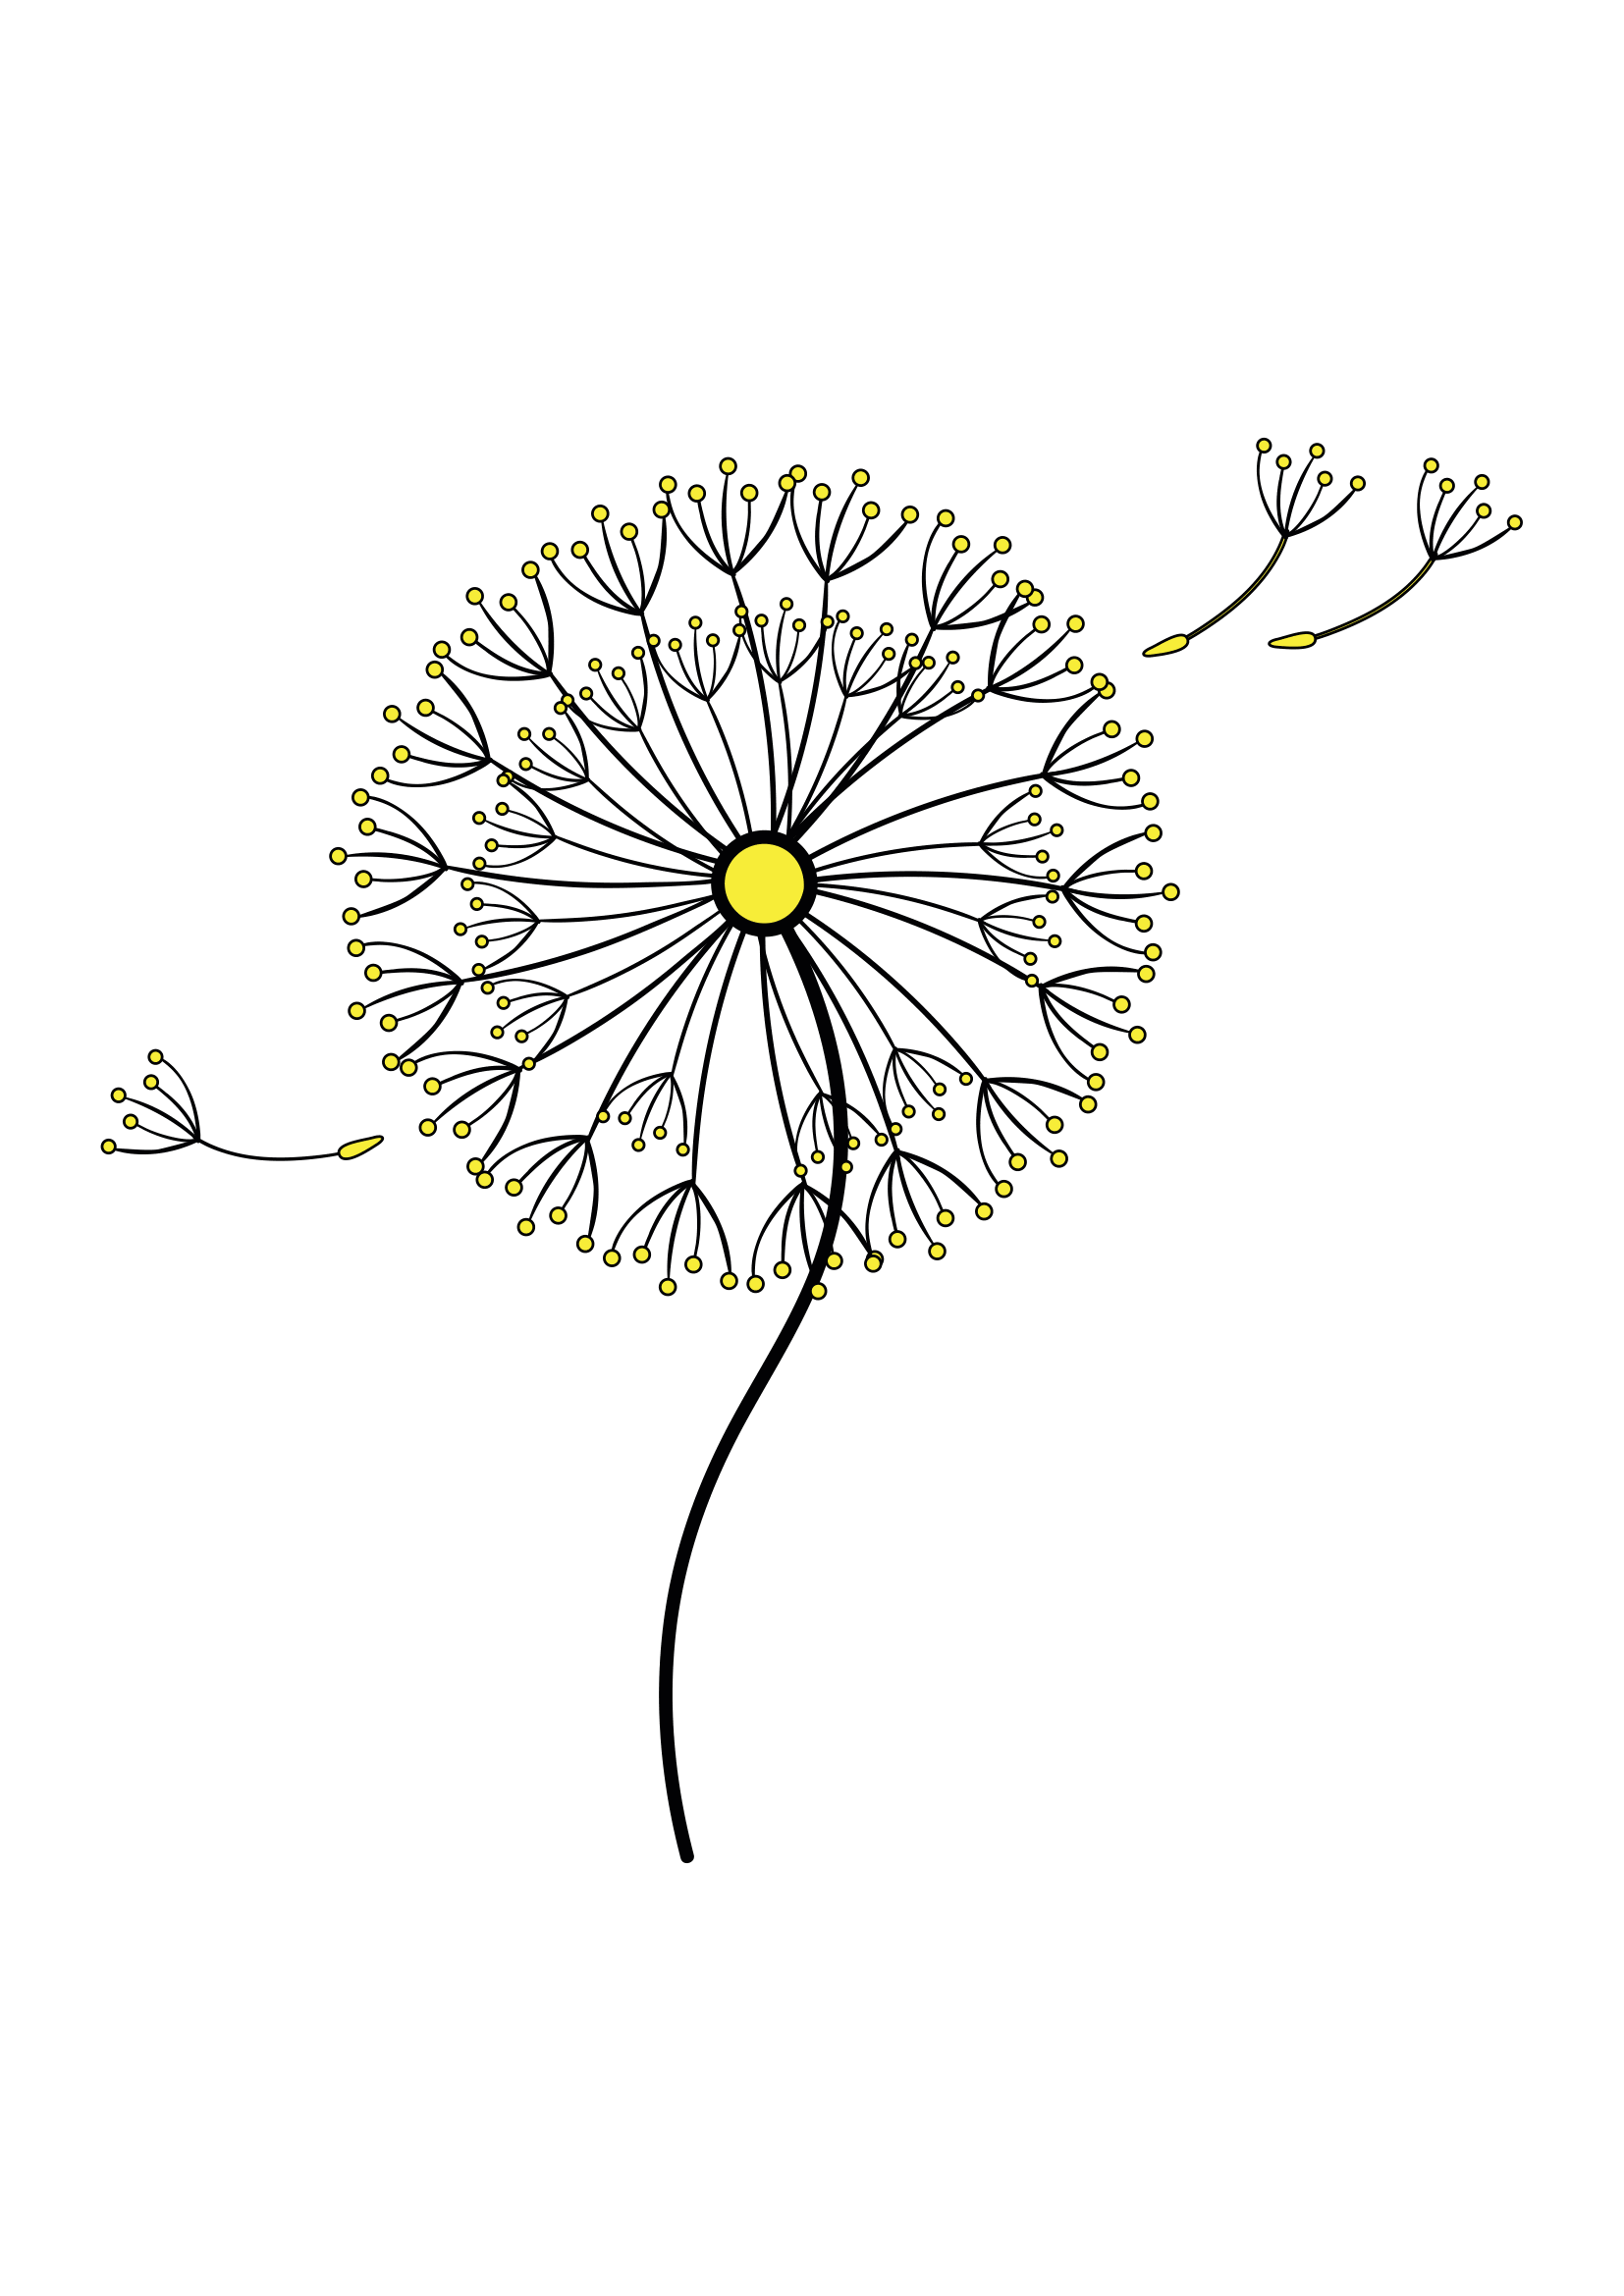 How to Draw A Dandelion Step by Step Printable